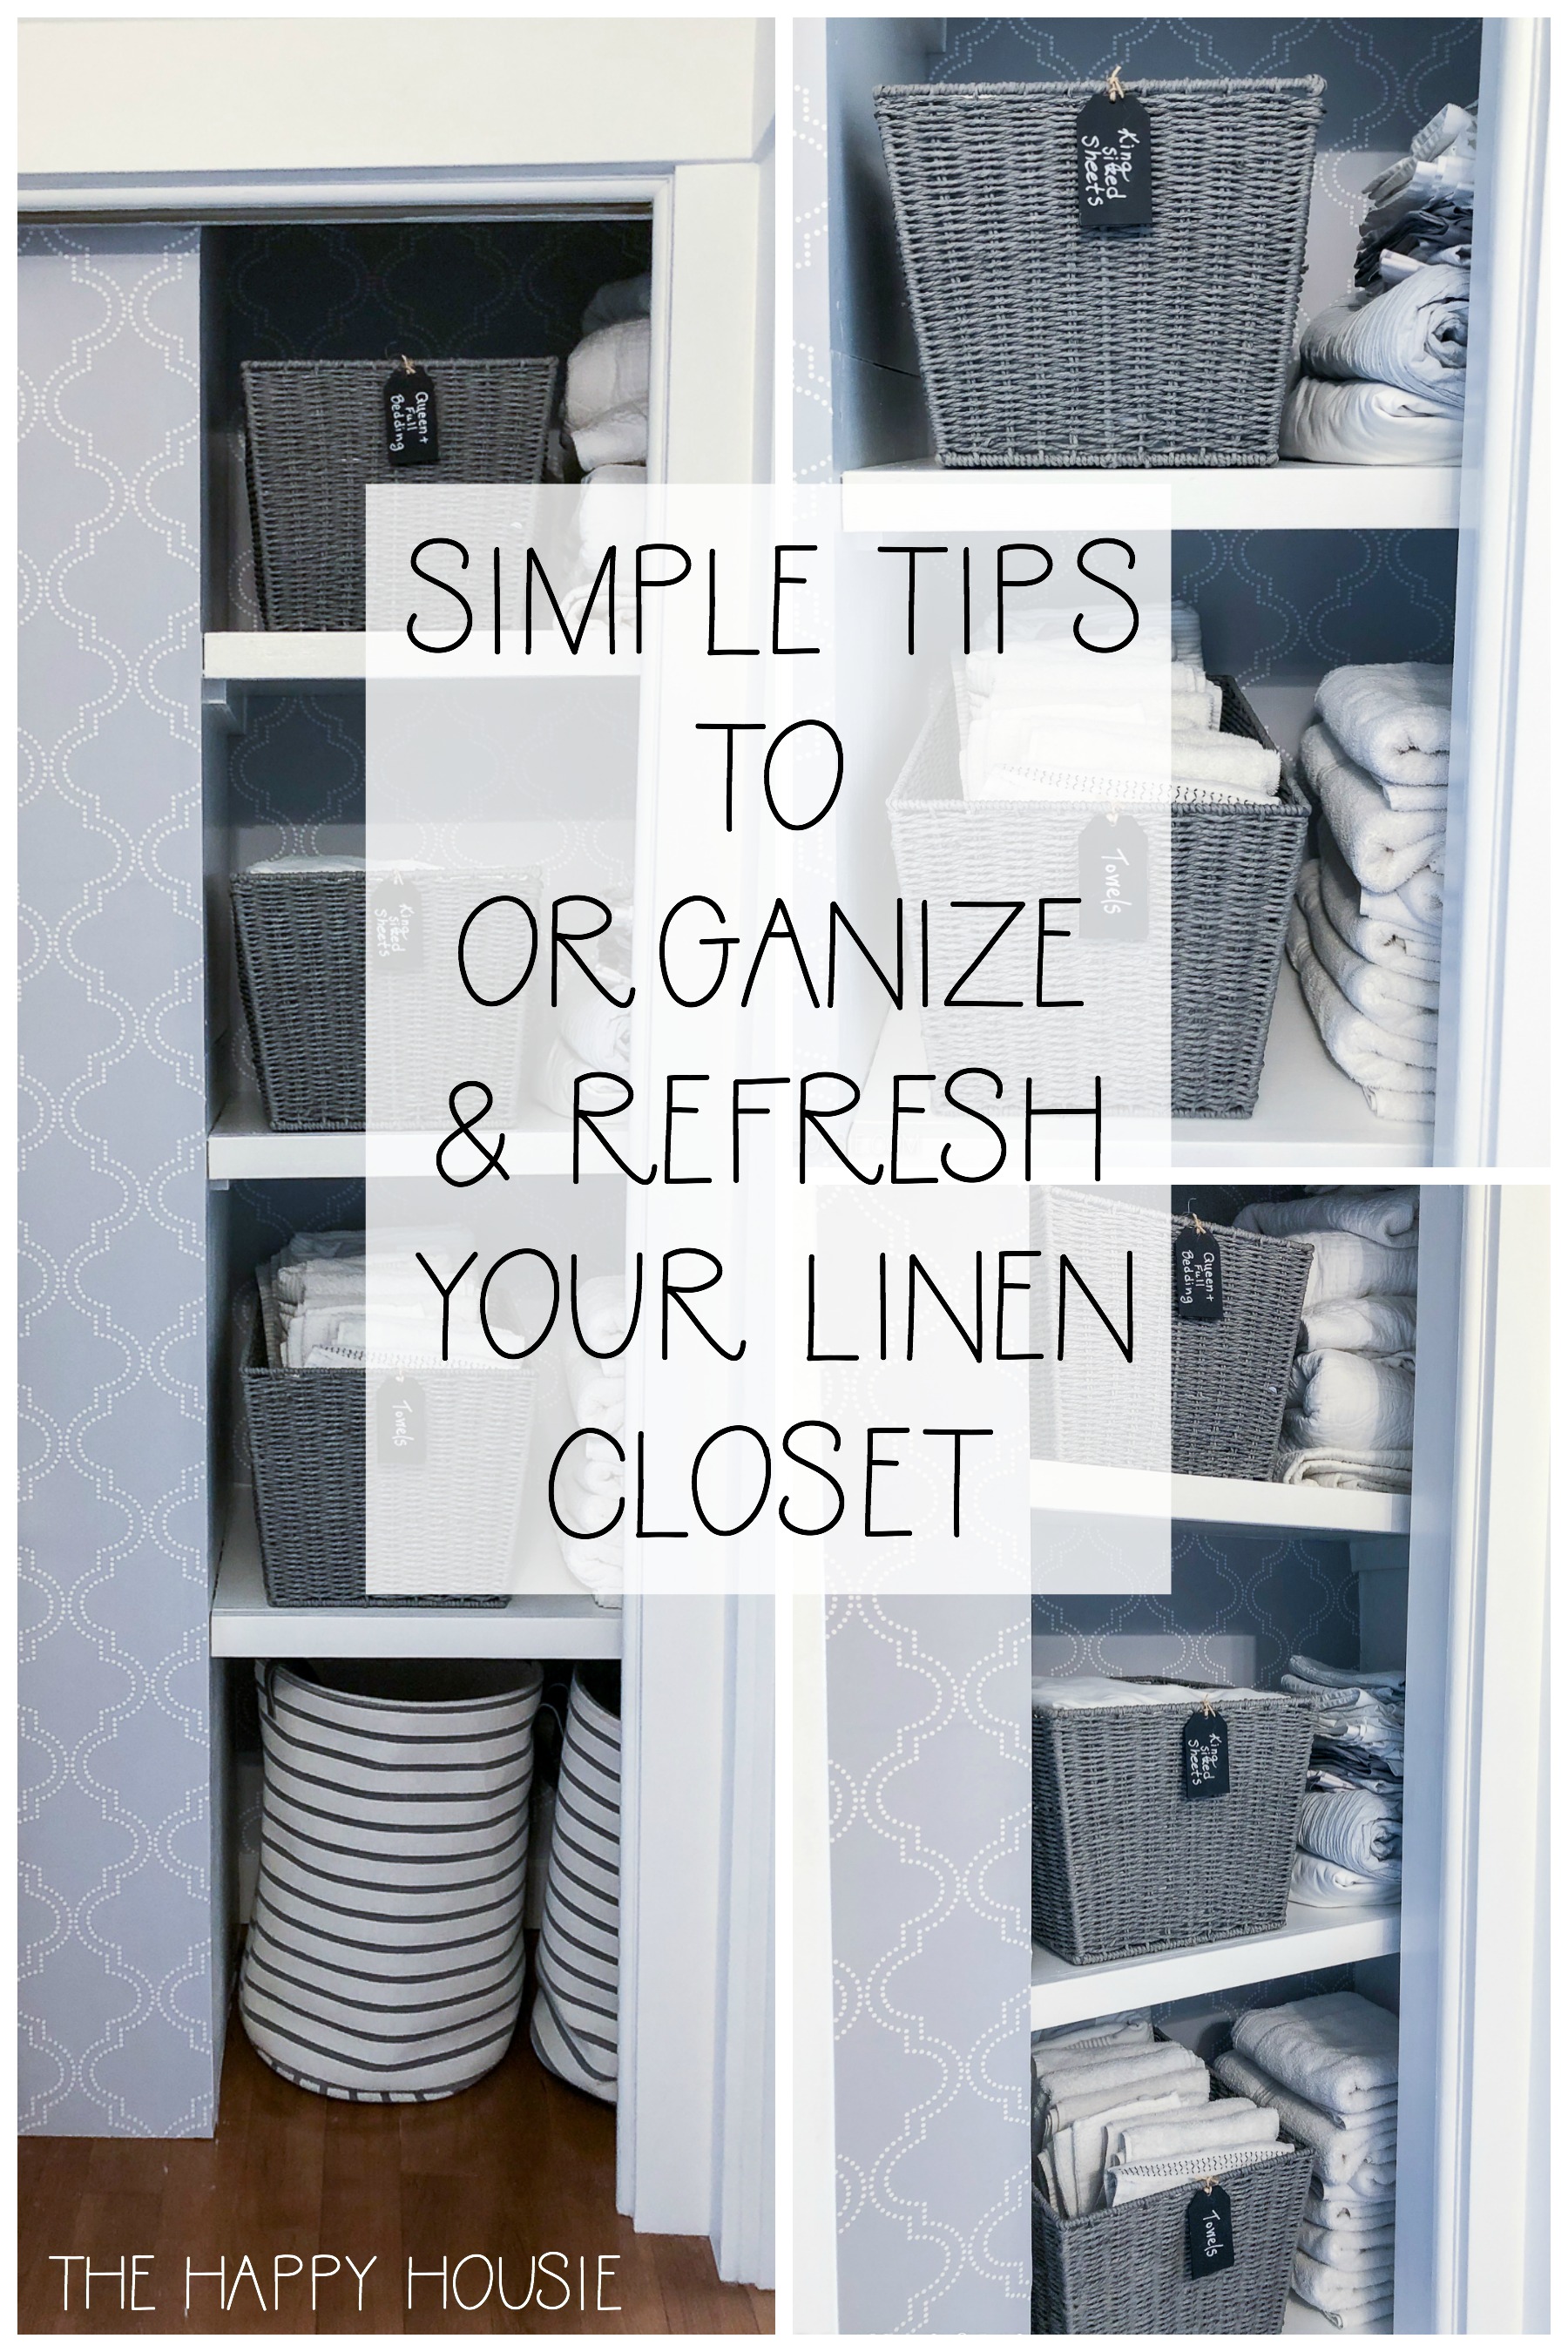 https://www.thehappyhousie.com/wp-content/uploads/2020/02/simple-tips-to-organize-and-refresh-your-linen-closet-10-week-organizing-challenge-at-the-happy-housie.jpg